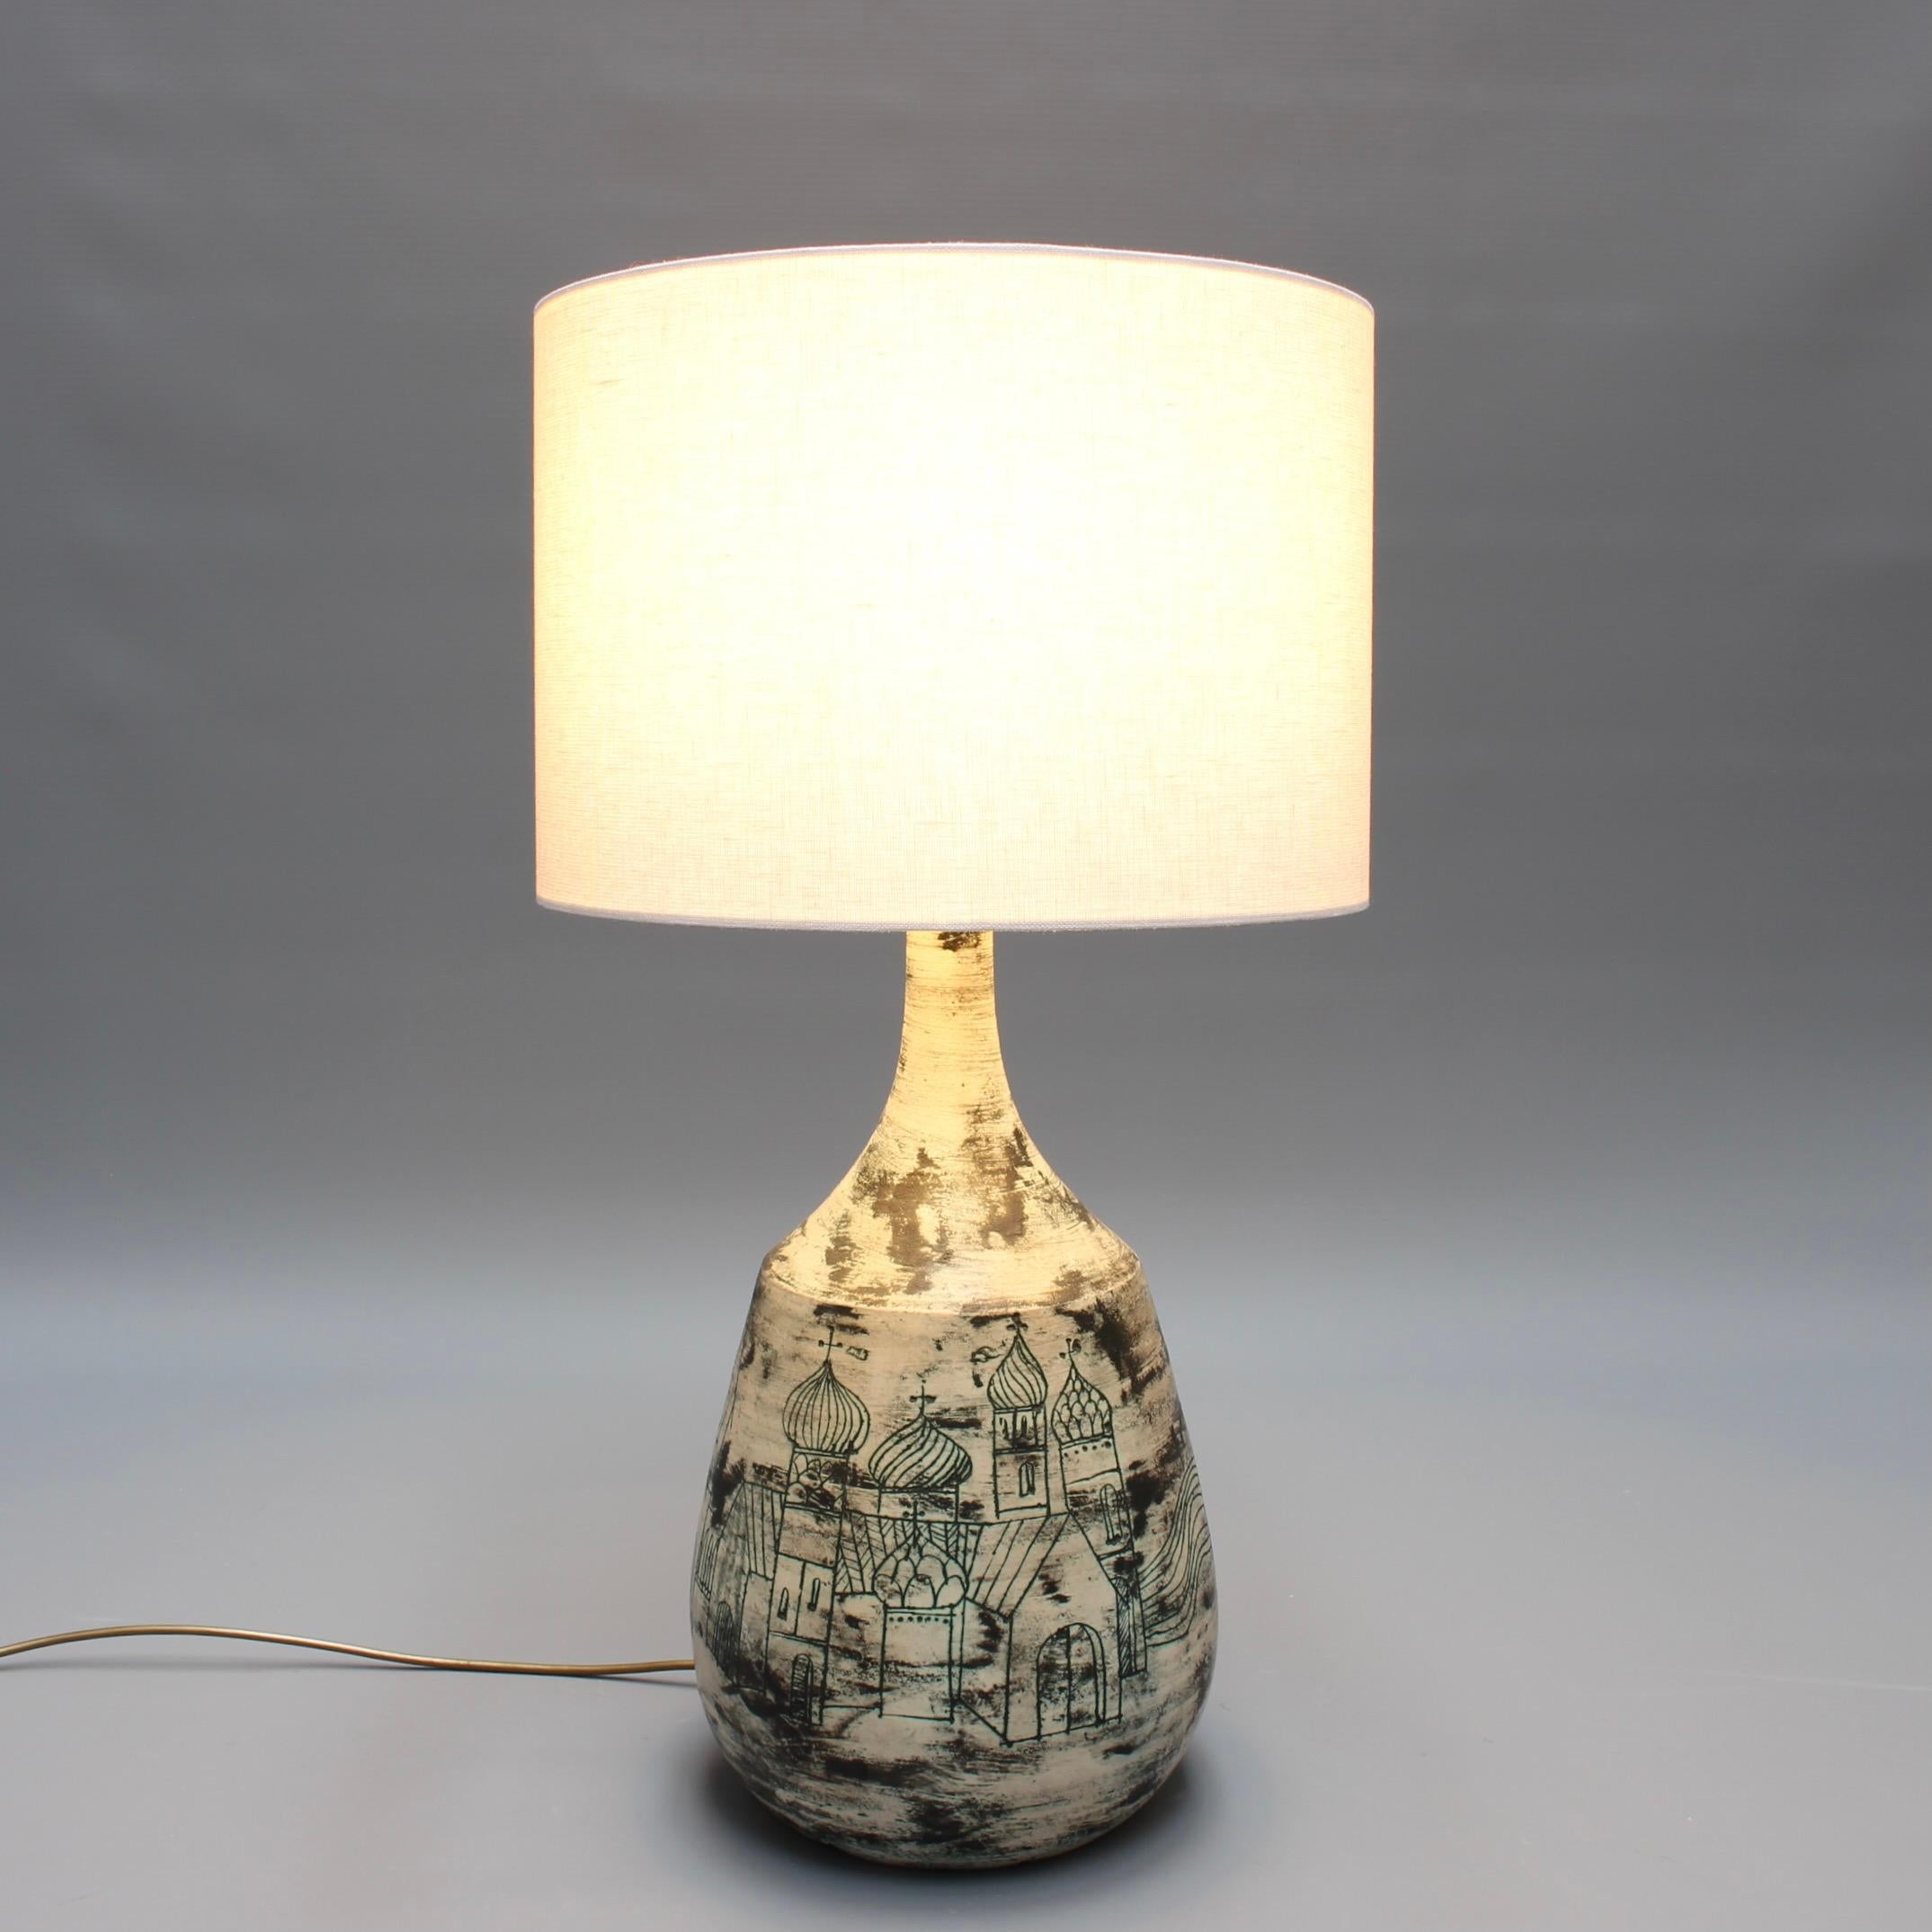 Vintage French Ceramic Lamp with Russian Motif by Jacques Blin c. 1950s, Large For Sale 2